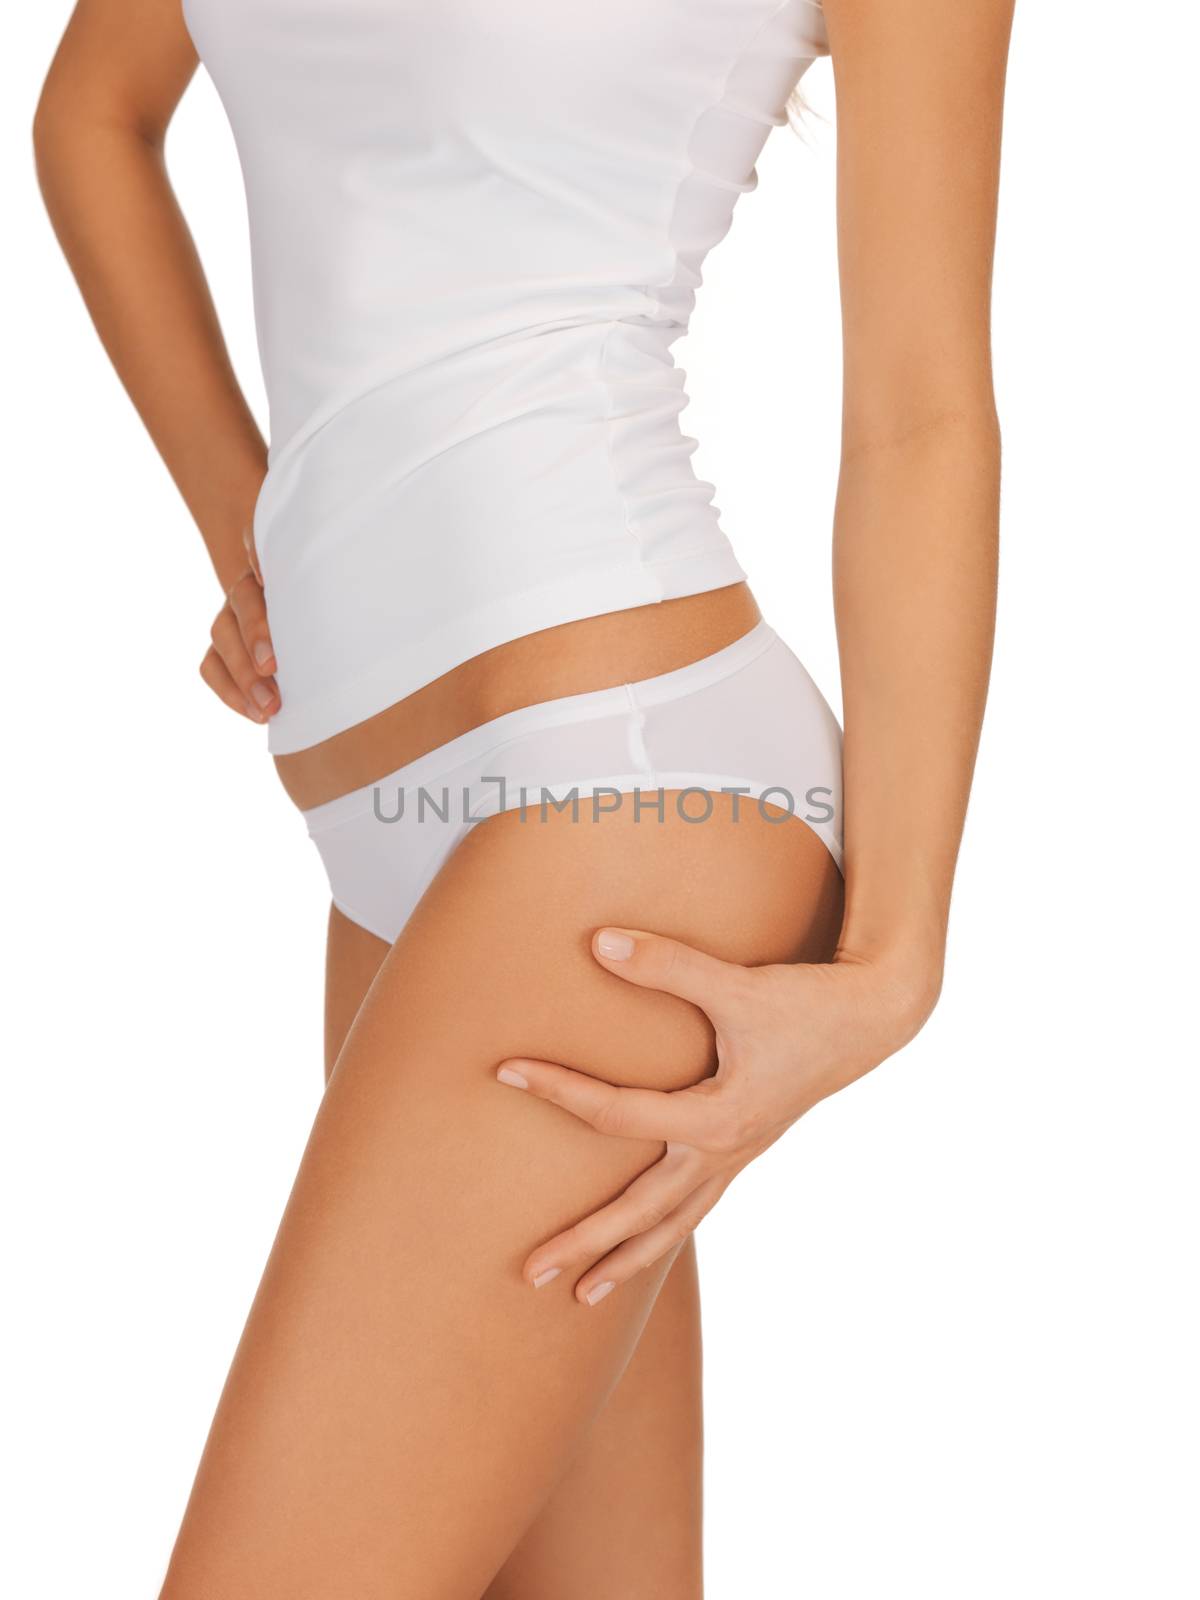 closeup picture of woman in cotton underwear showing slimming concept